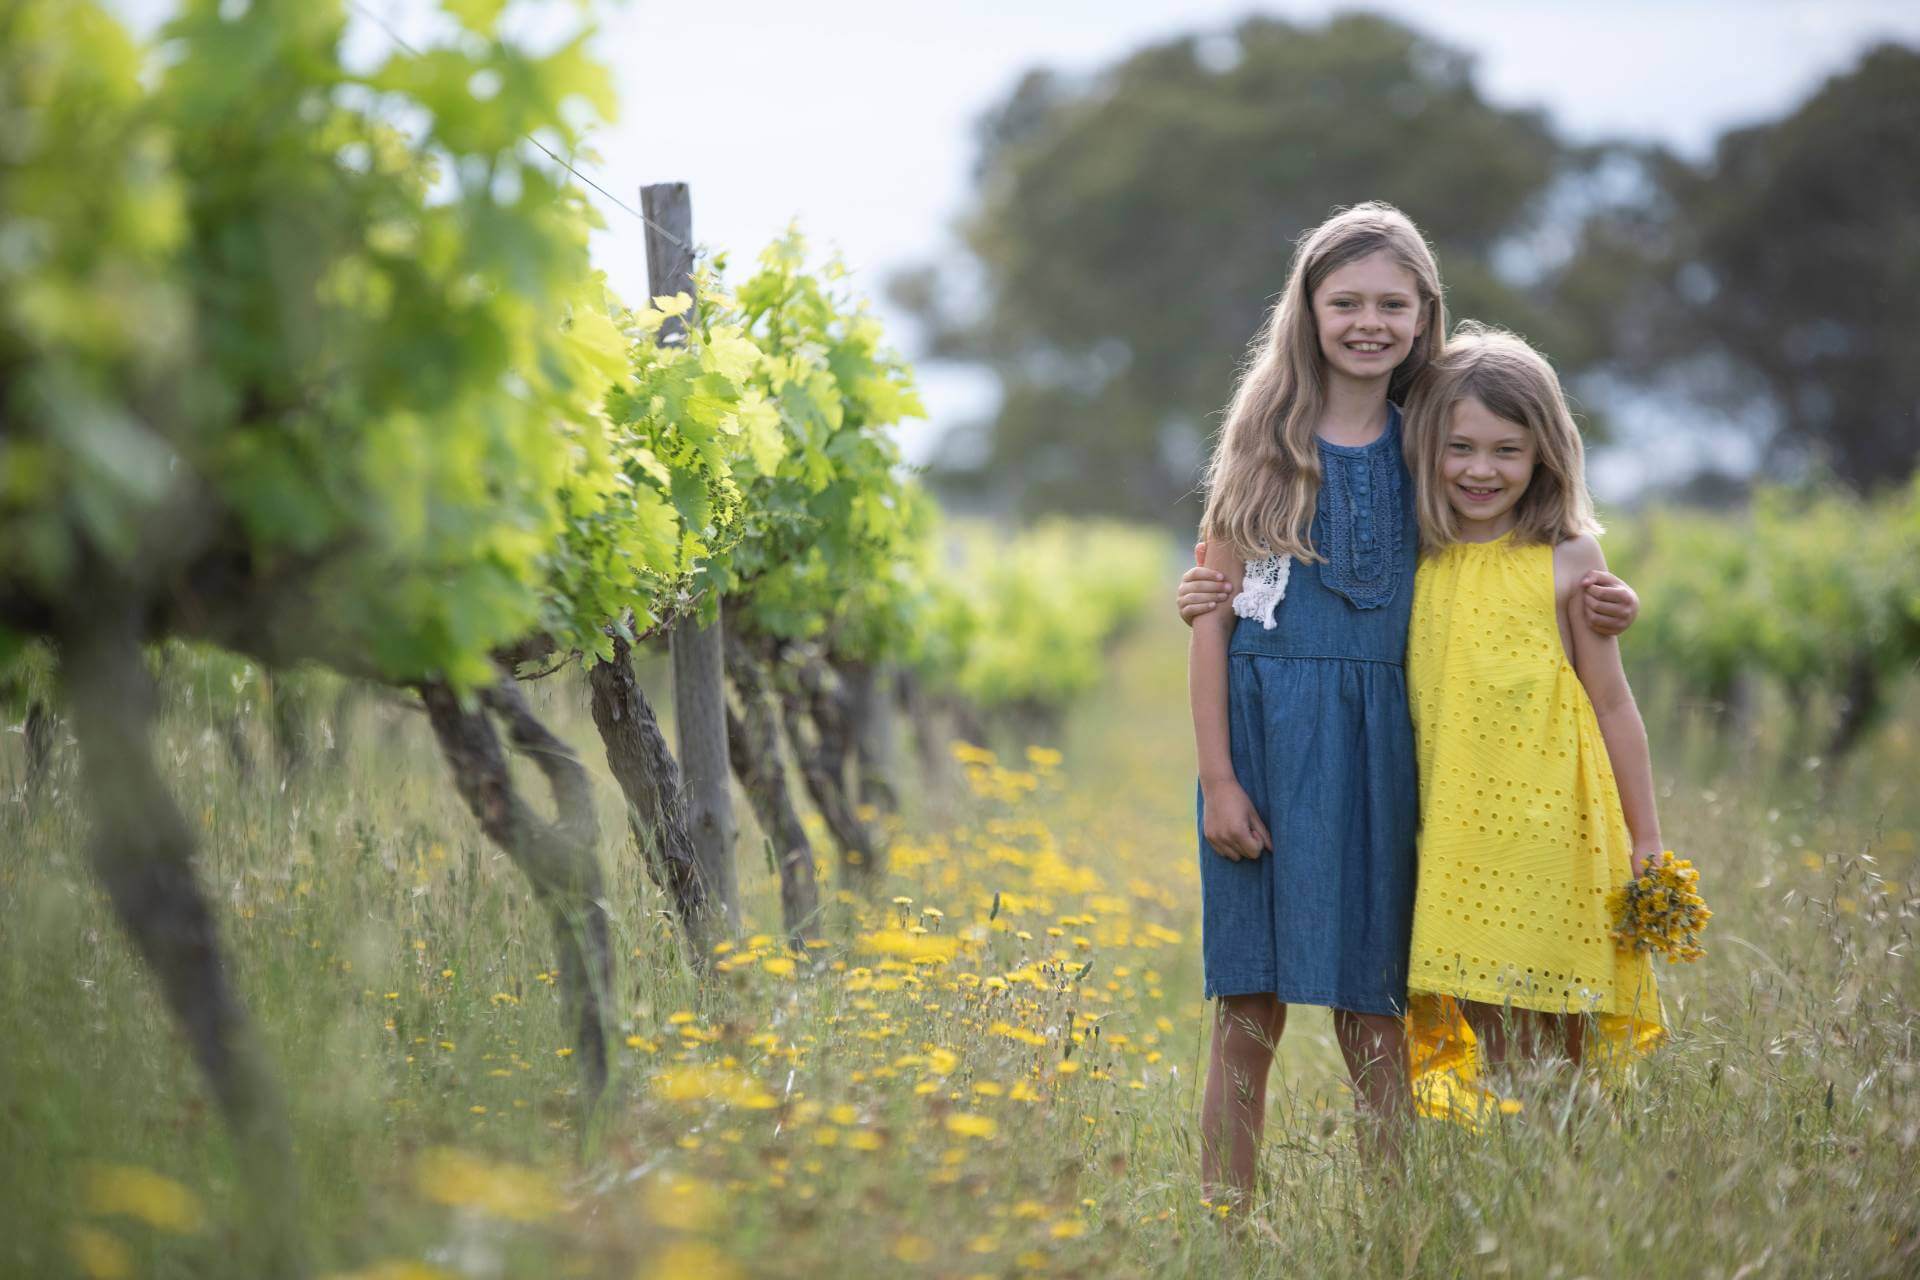 Lucy and Alice standing together in the organic vineyard when they were younger